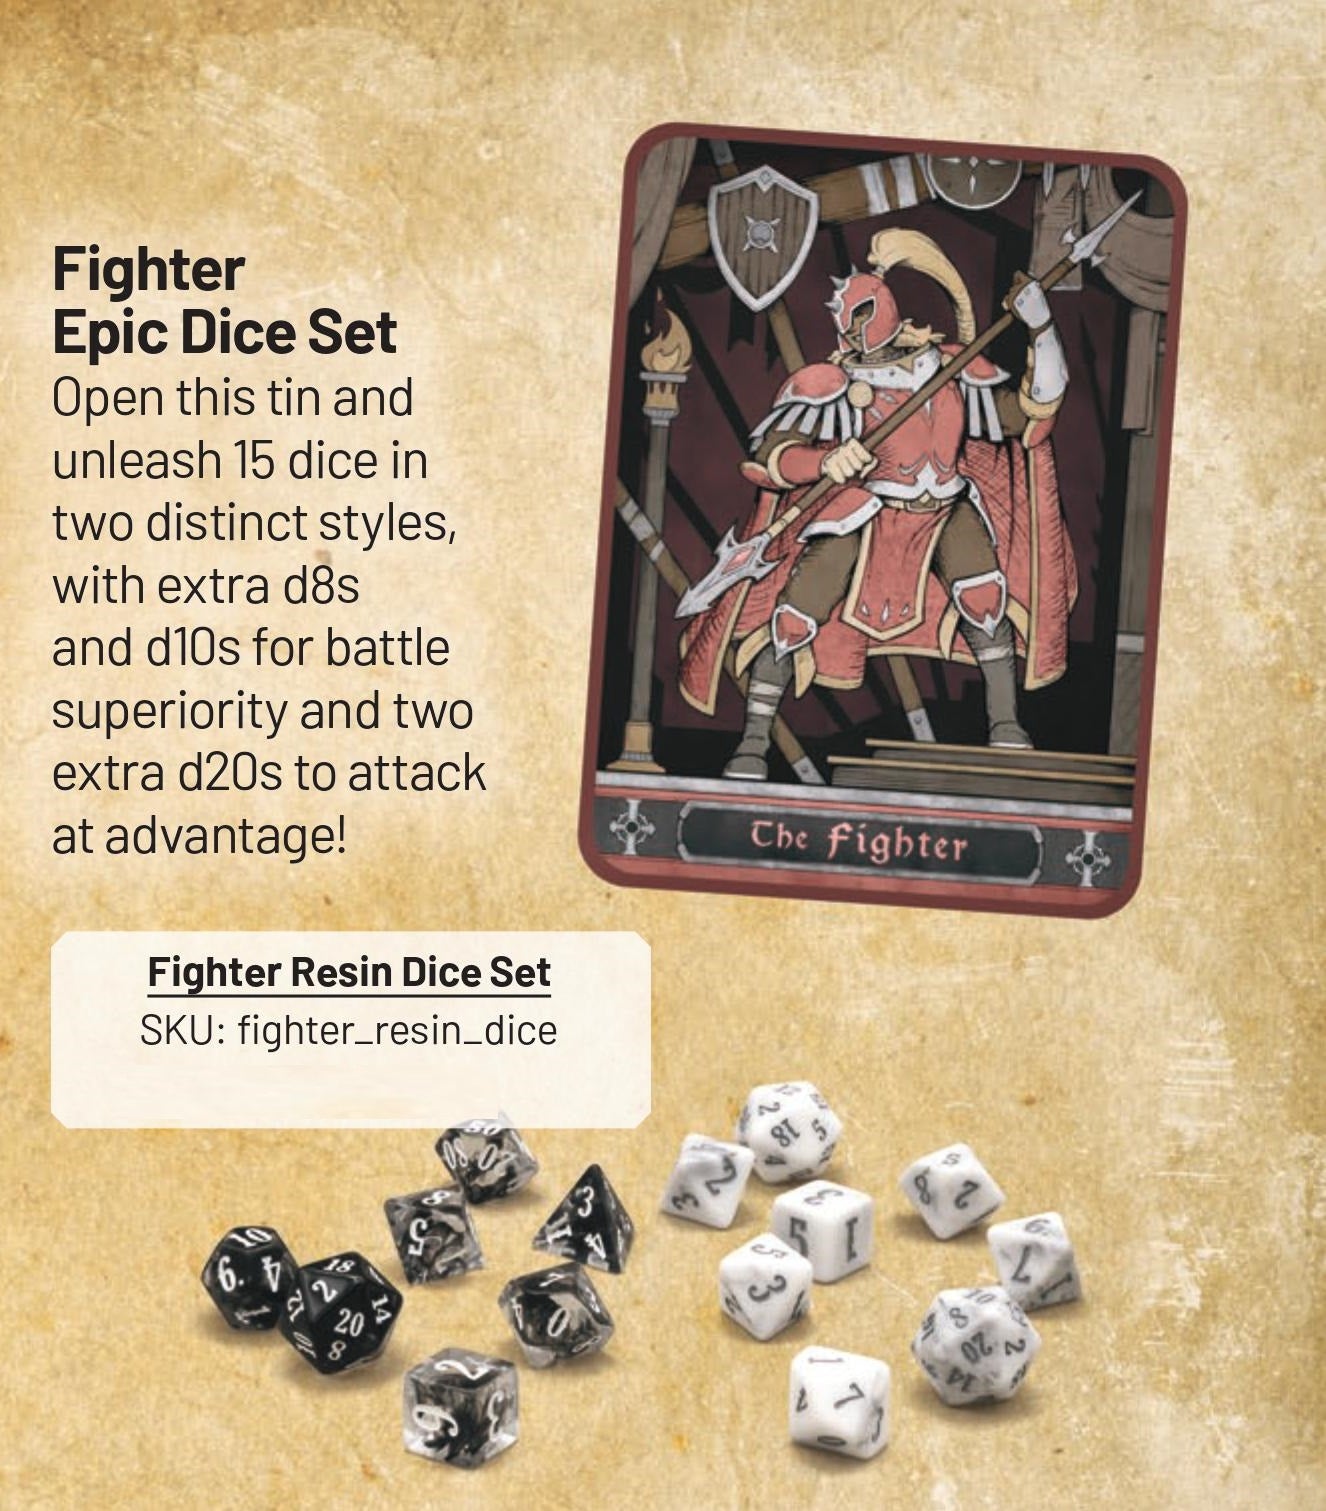 Beadle & Grimm's Fighter EPIC Dice Set & Rolling Tray